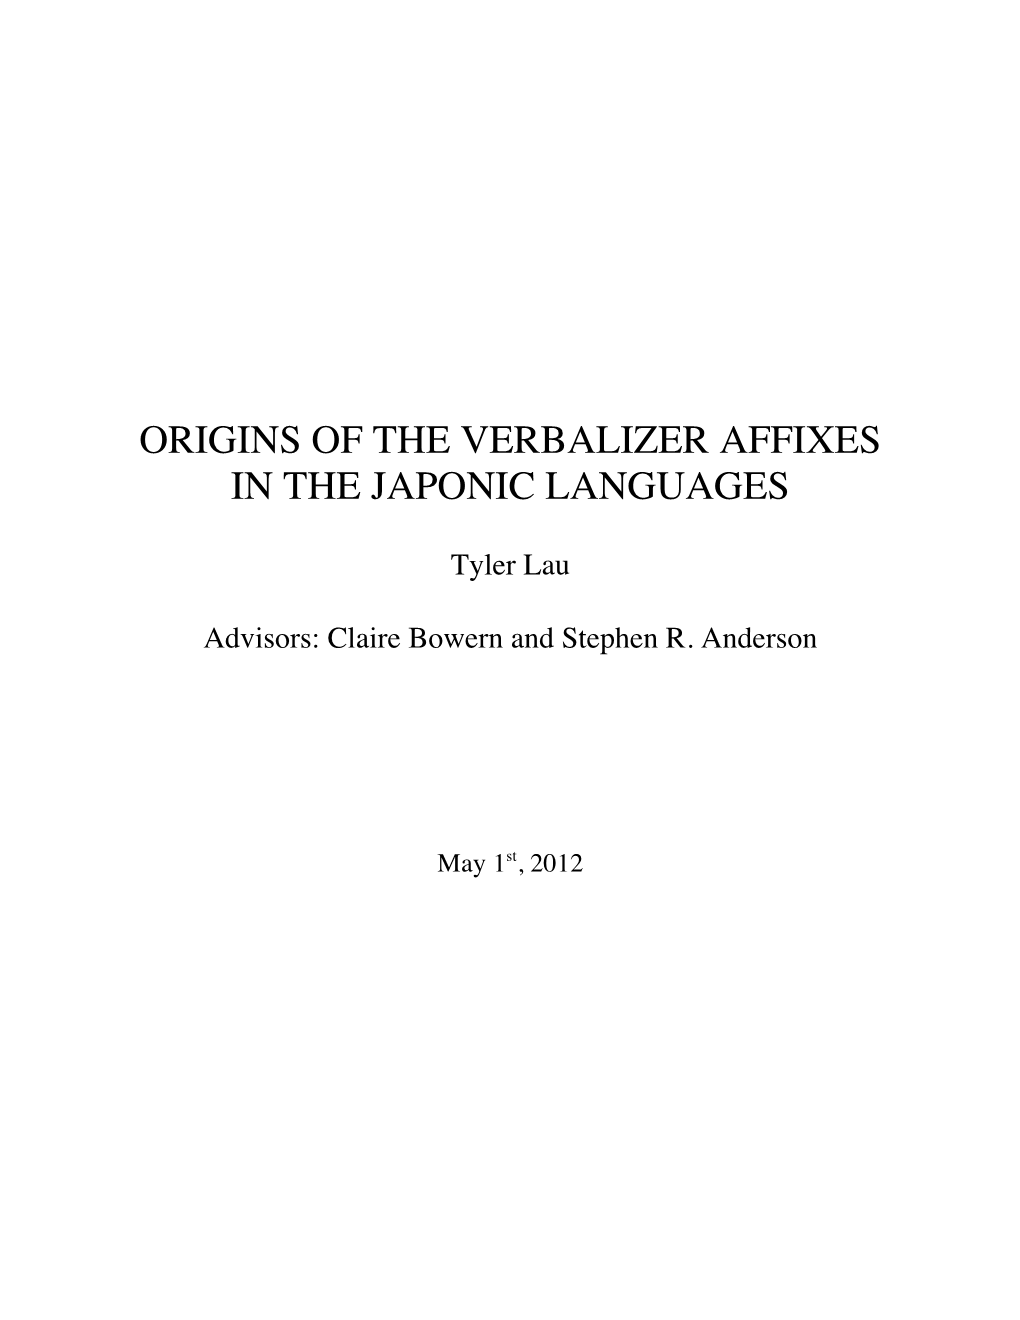 Origins of the Verbalizer Affixes in the Japonic Languages